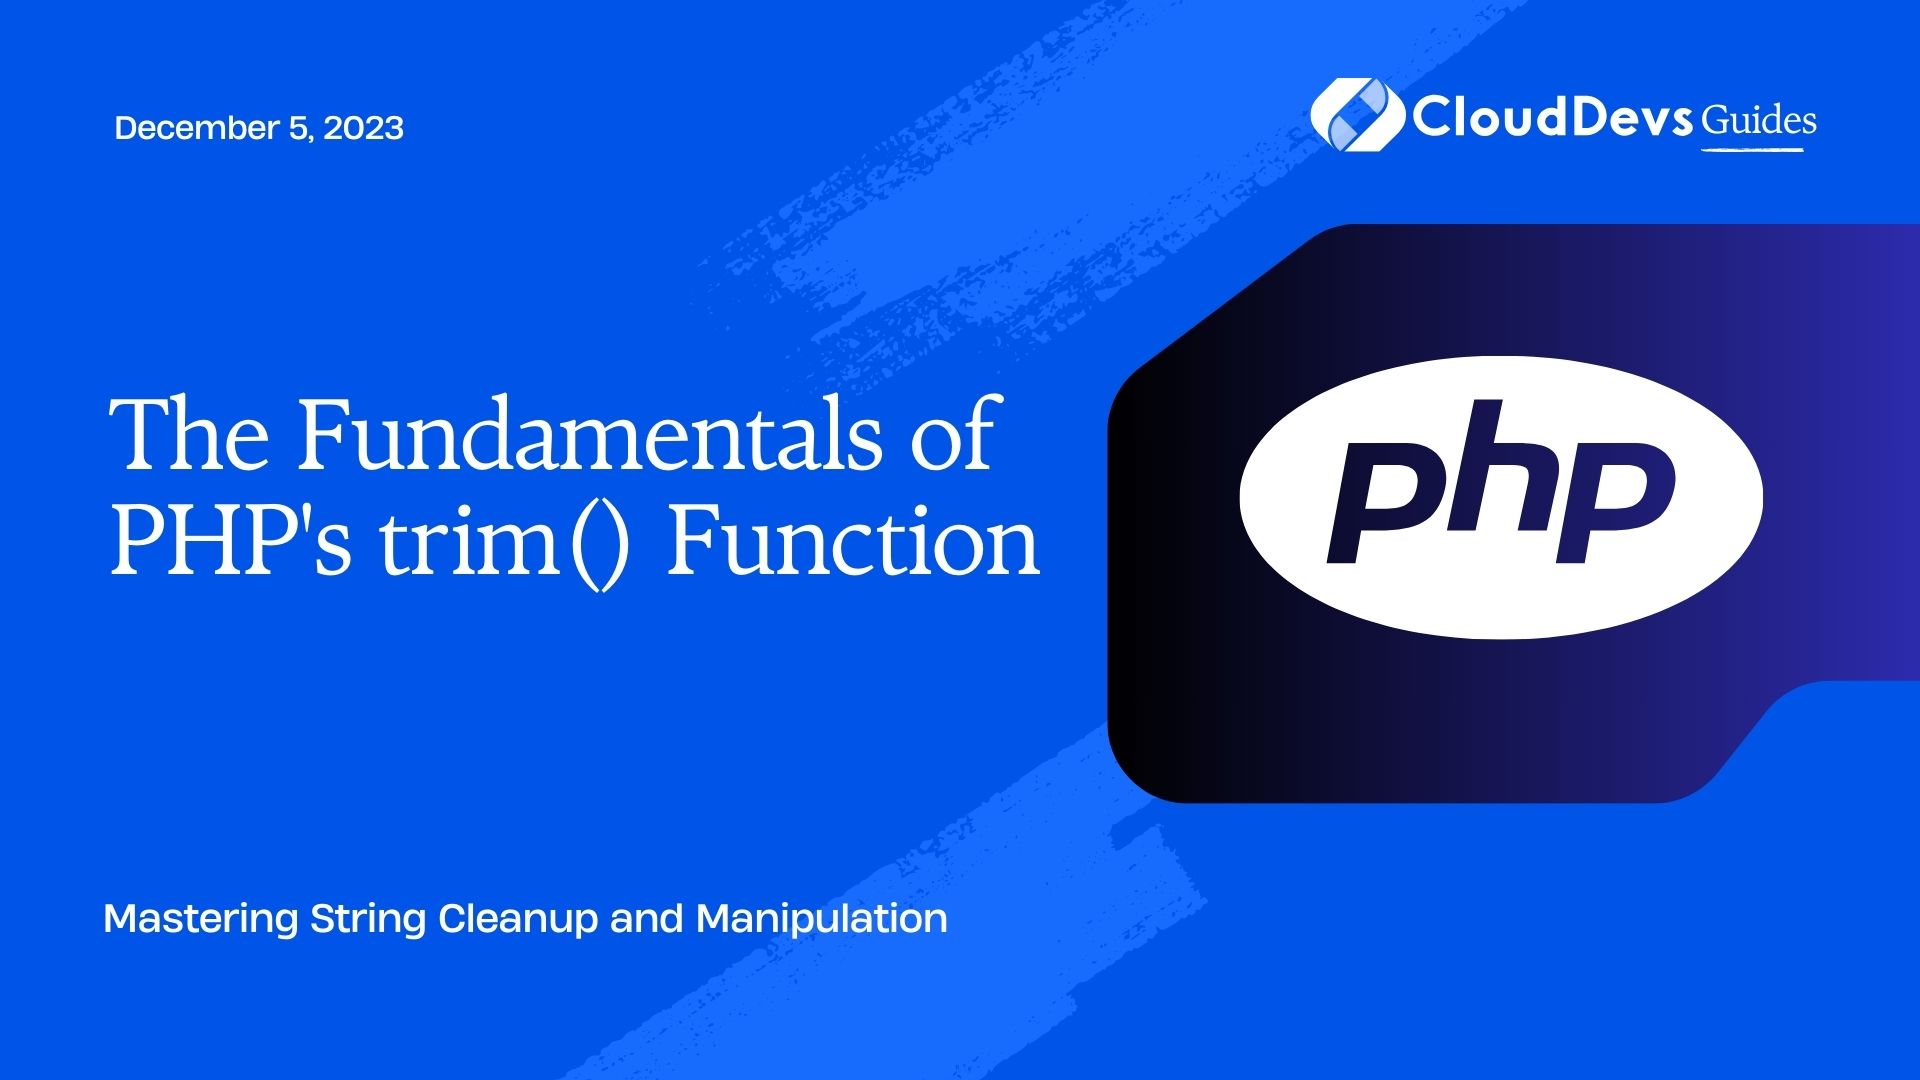 The Fundamentals of PHP's trim() Function